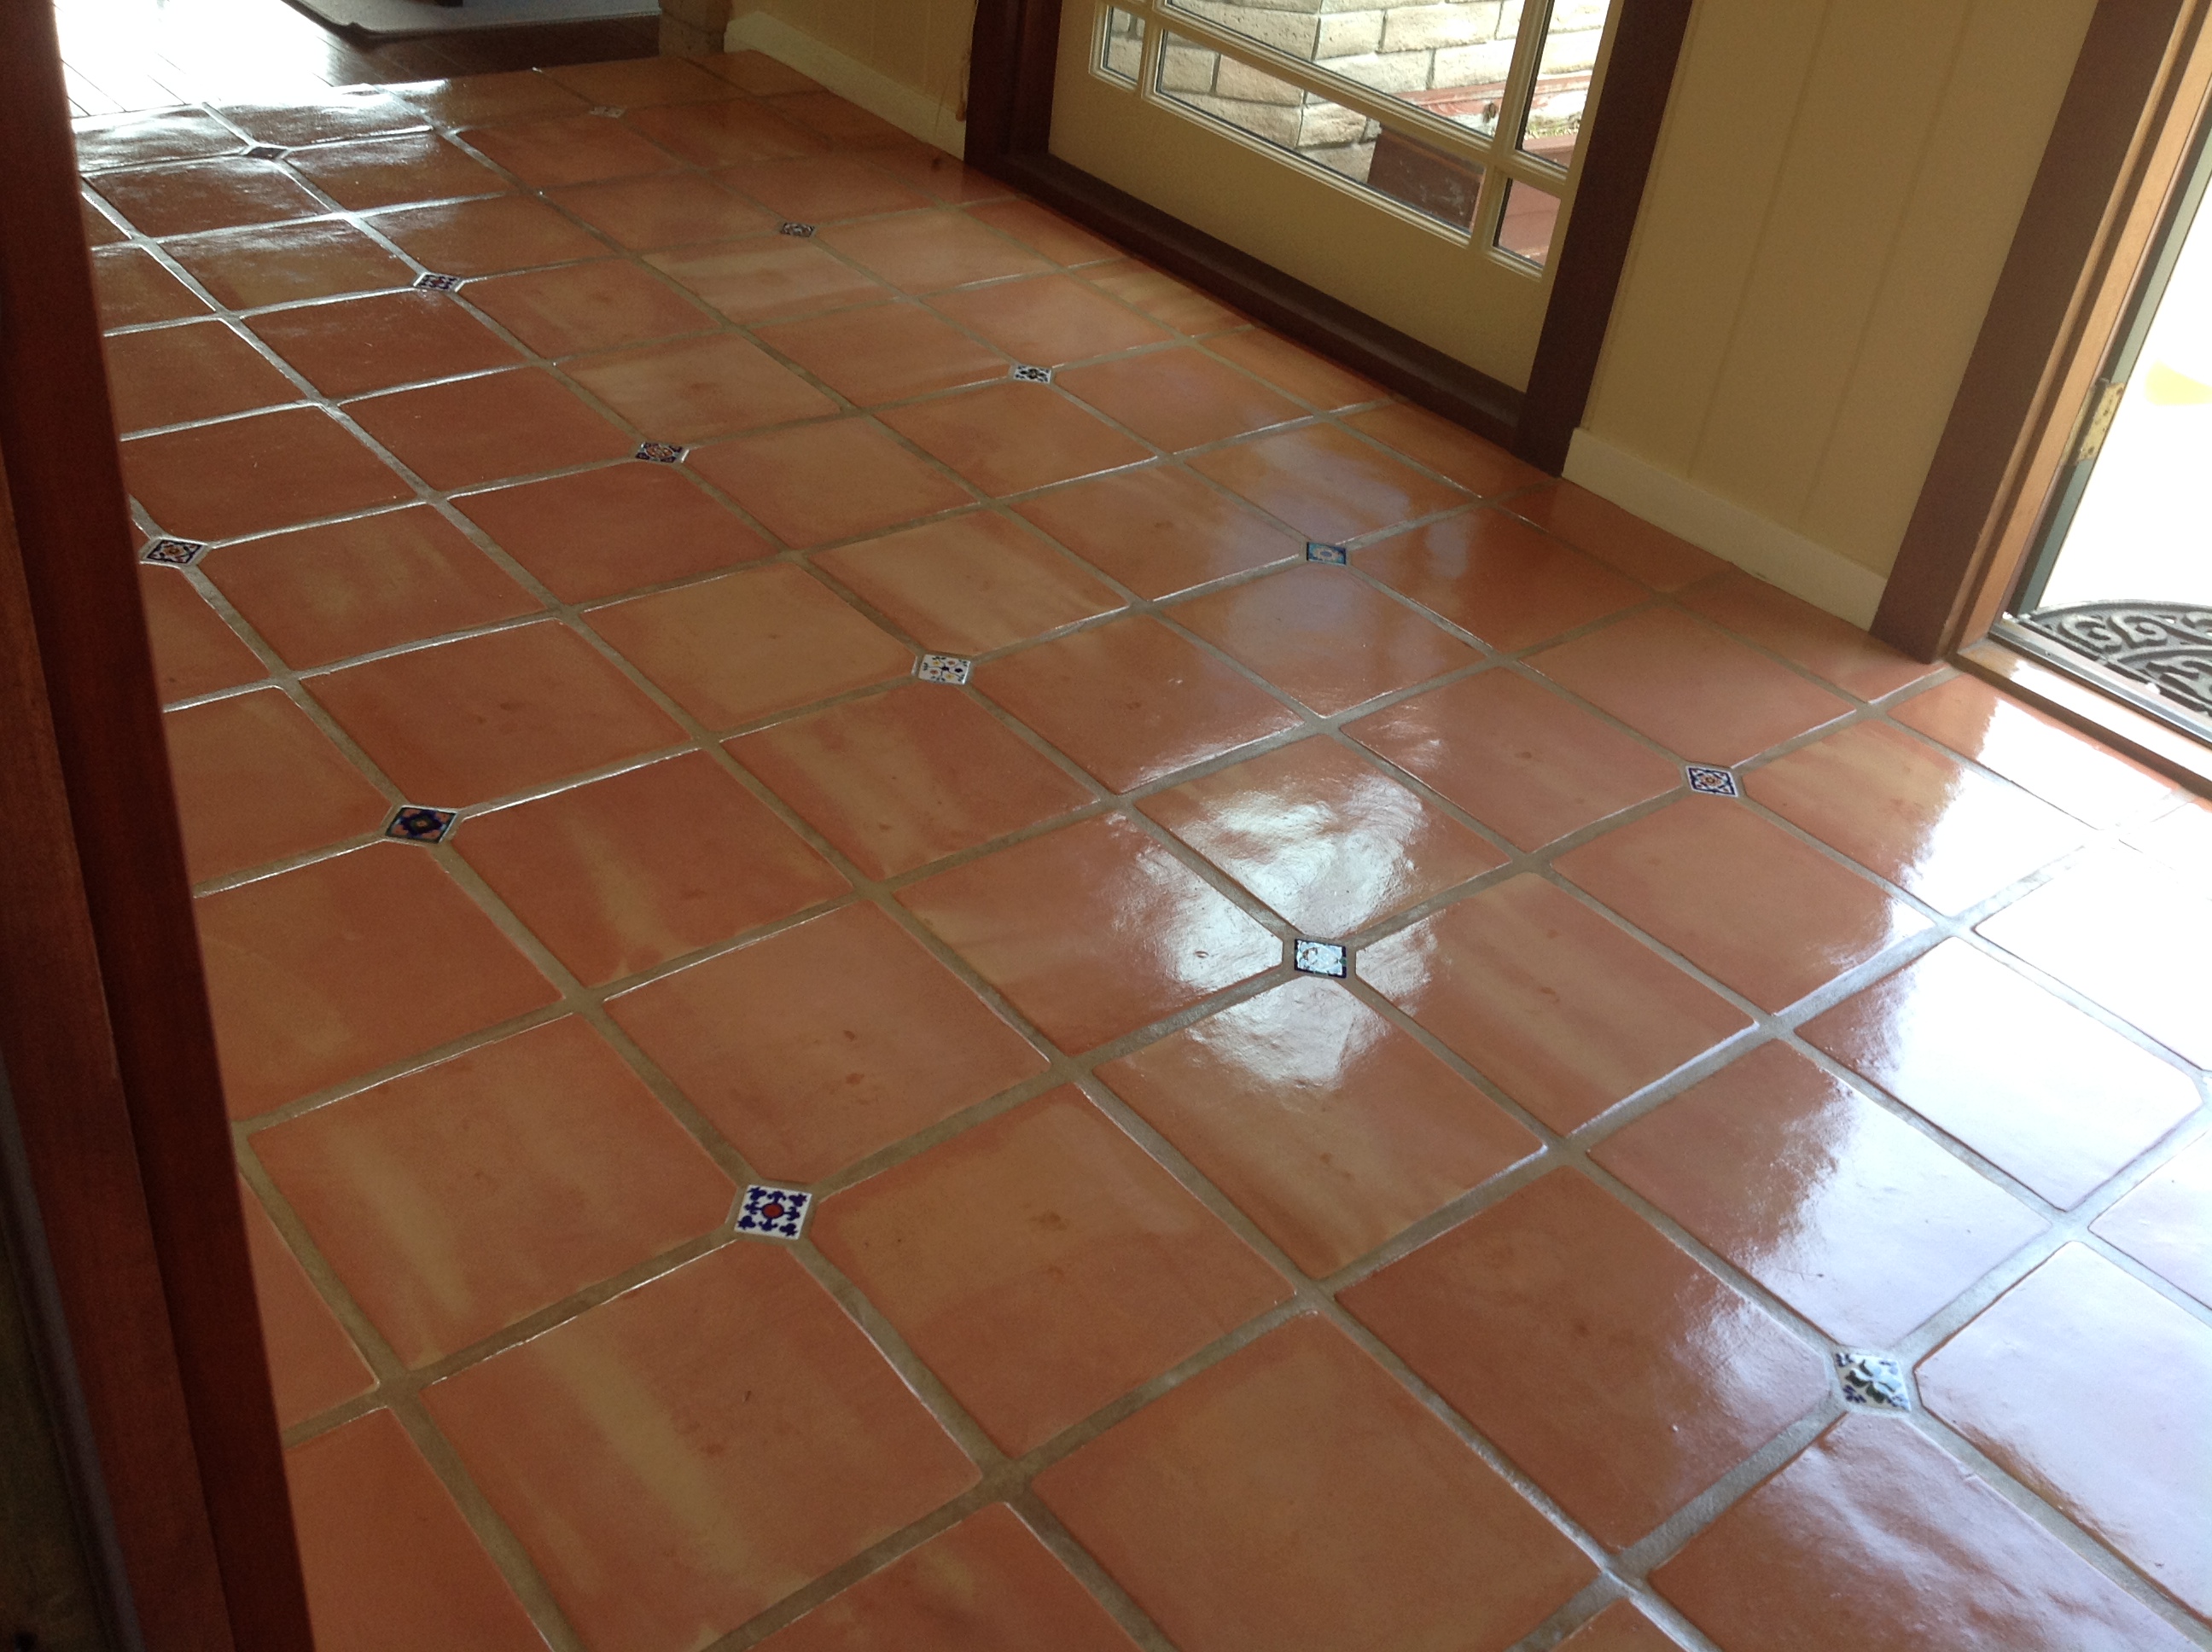 Spruce up those Saltillo Tiles from Dull to Shine in no Time